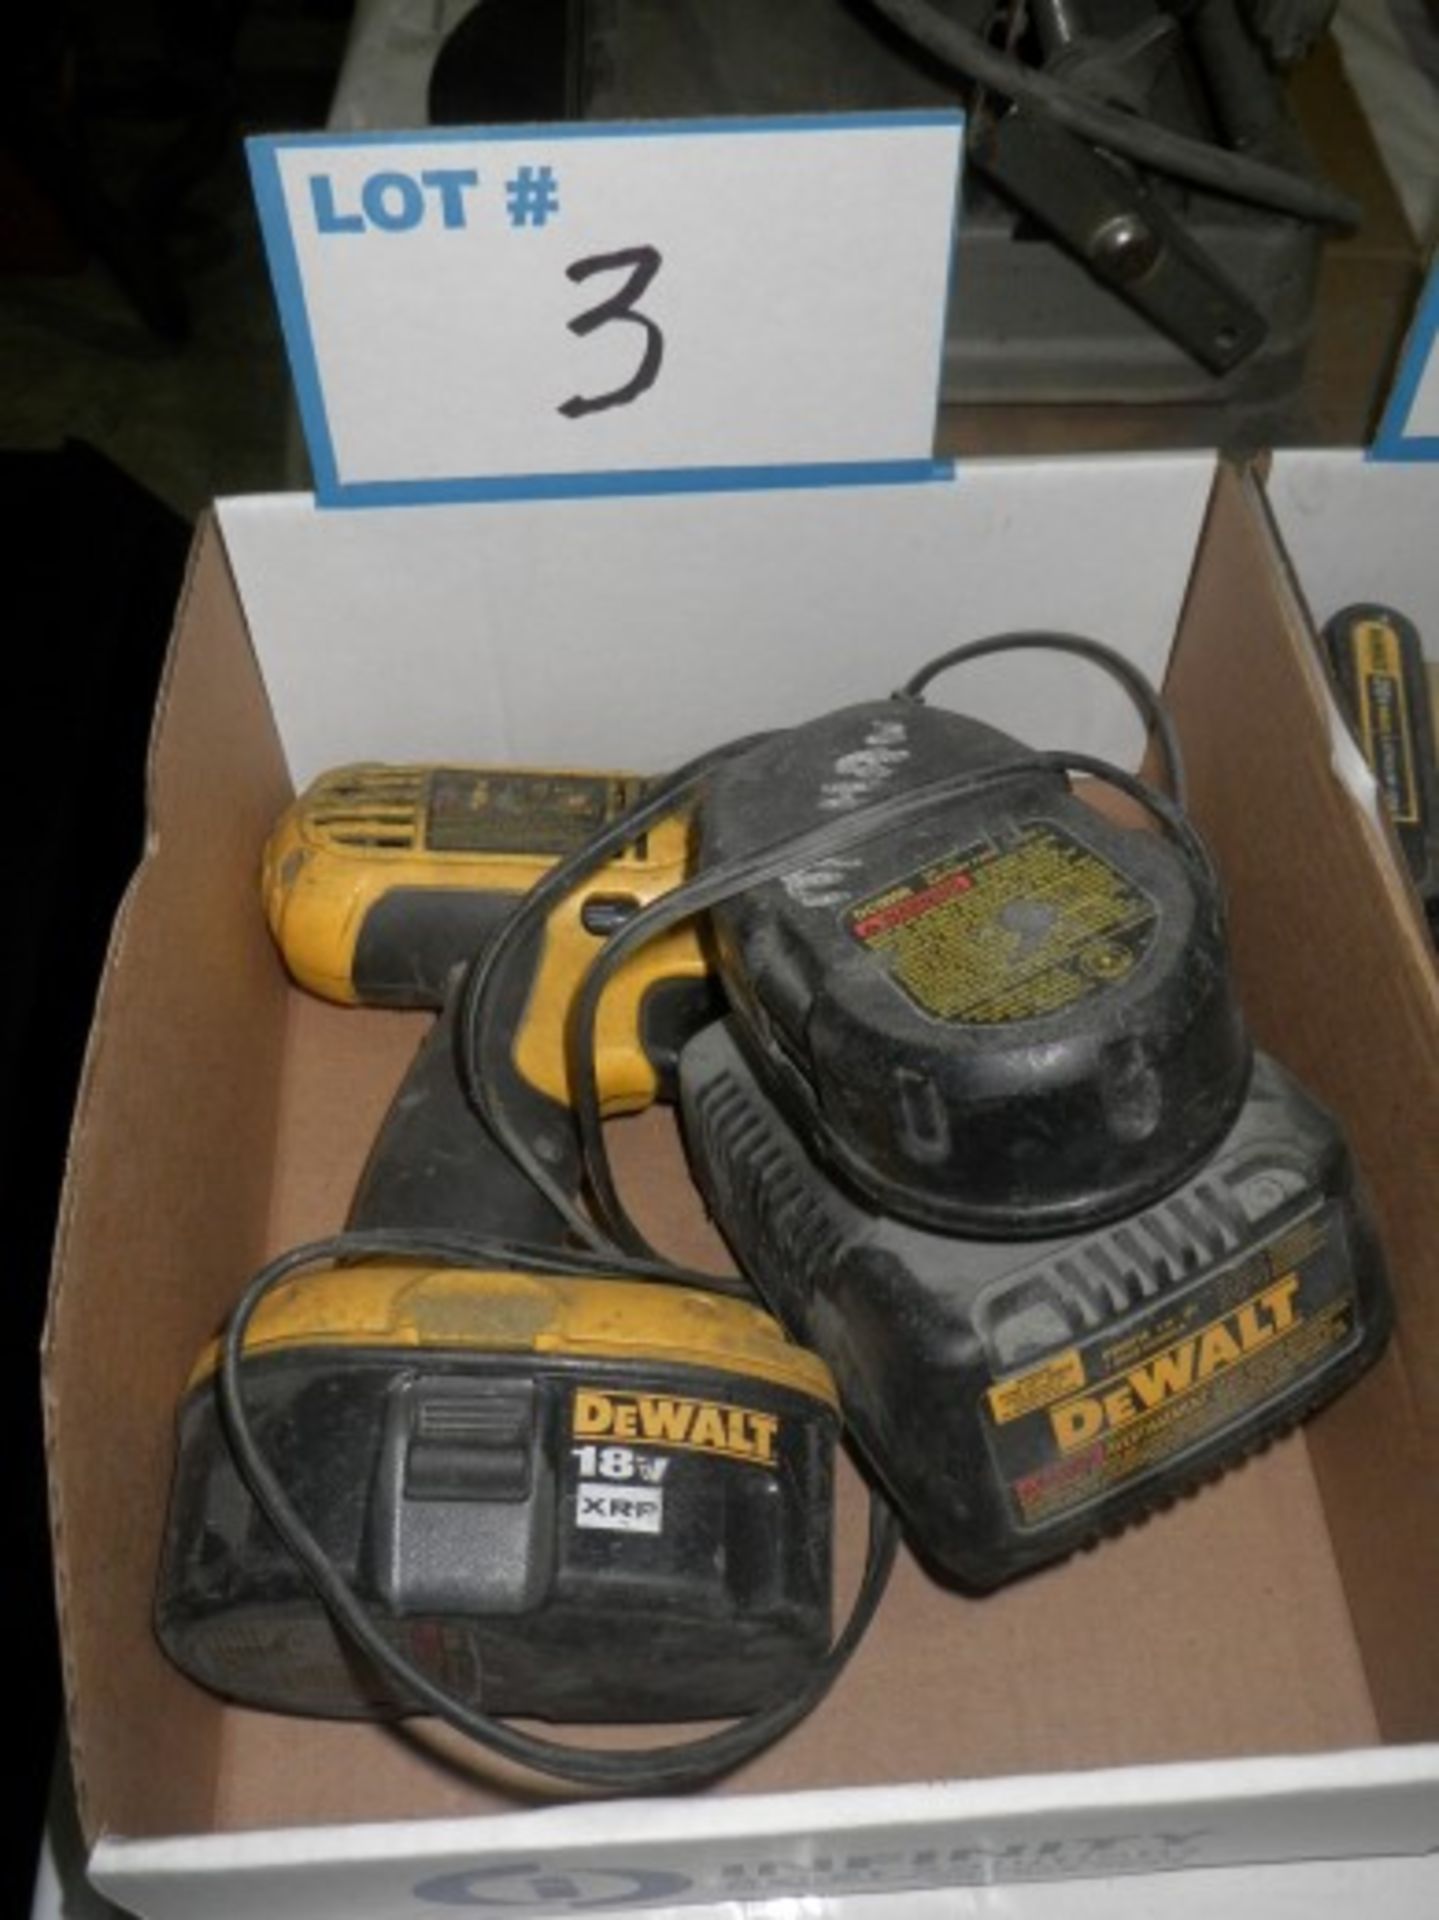 Dewat 18V Drill Driver w/ Charger (DRY)